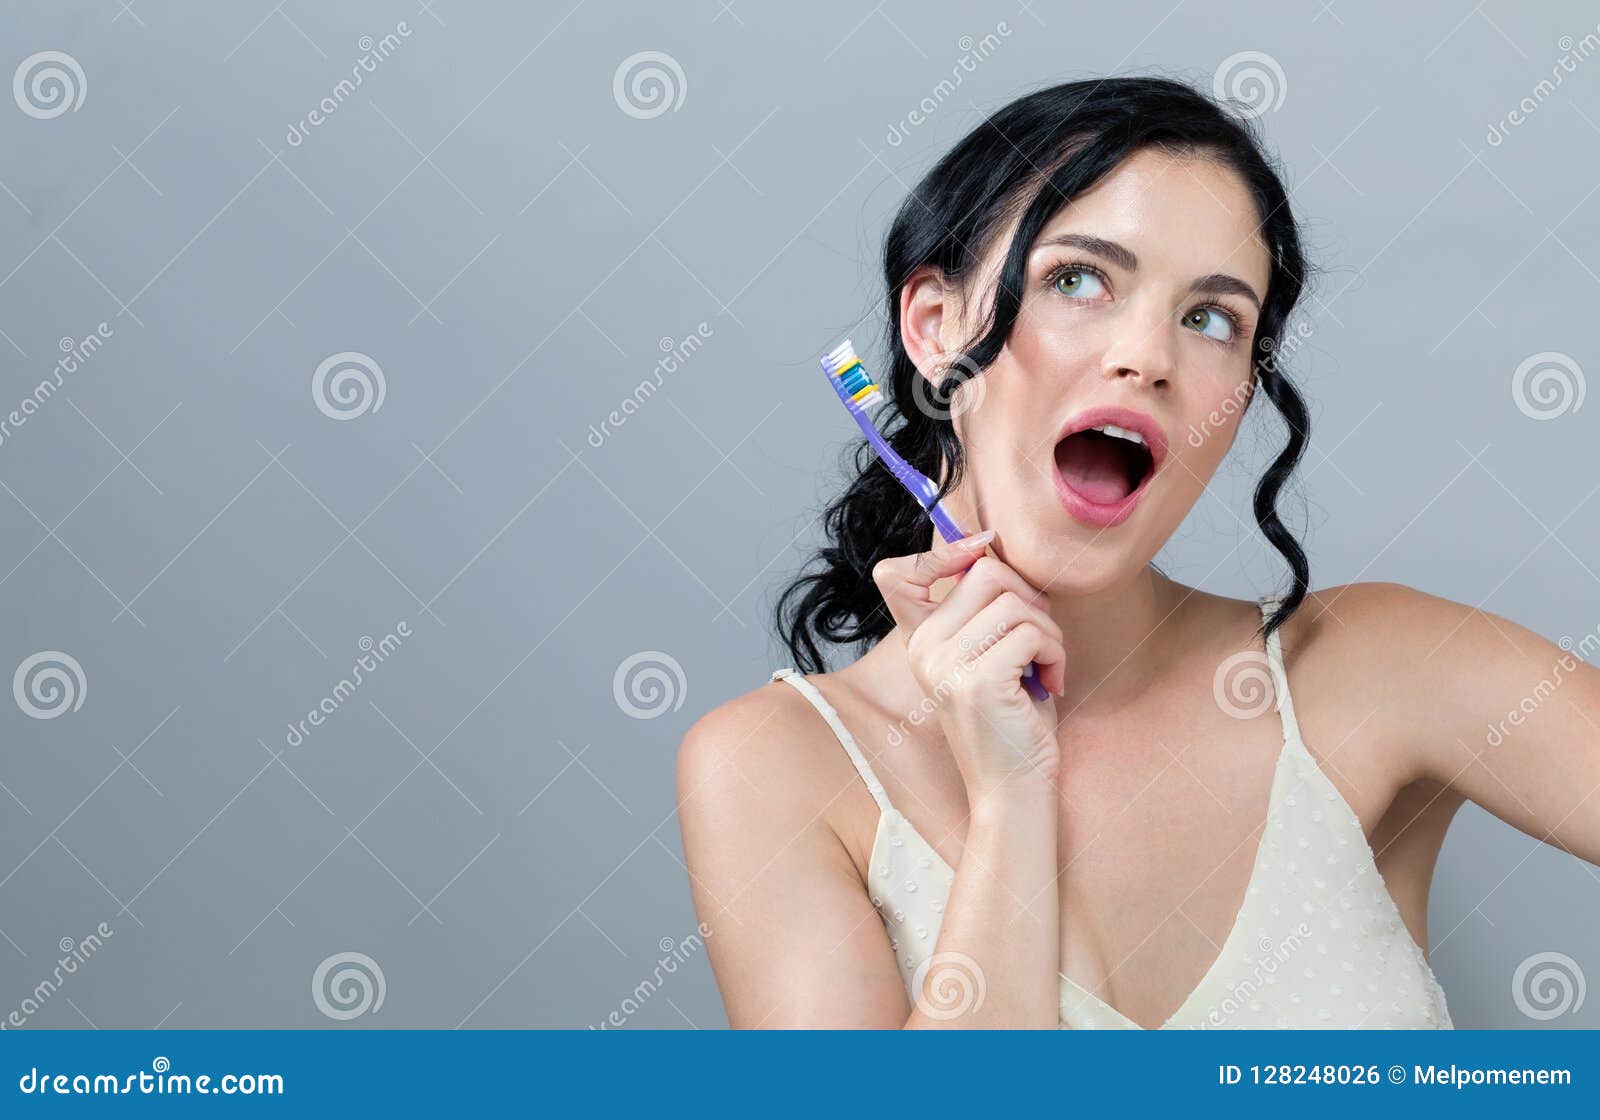 Young Woman Holding A Toothbrush Stock Photo Image Of Color Teeth